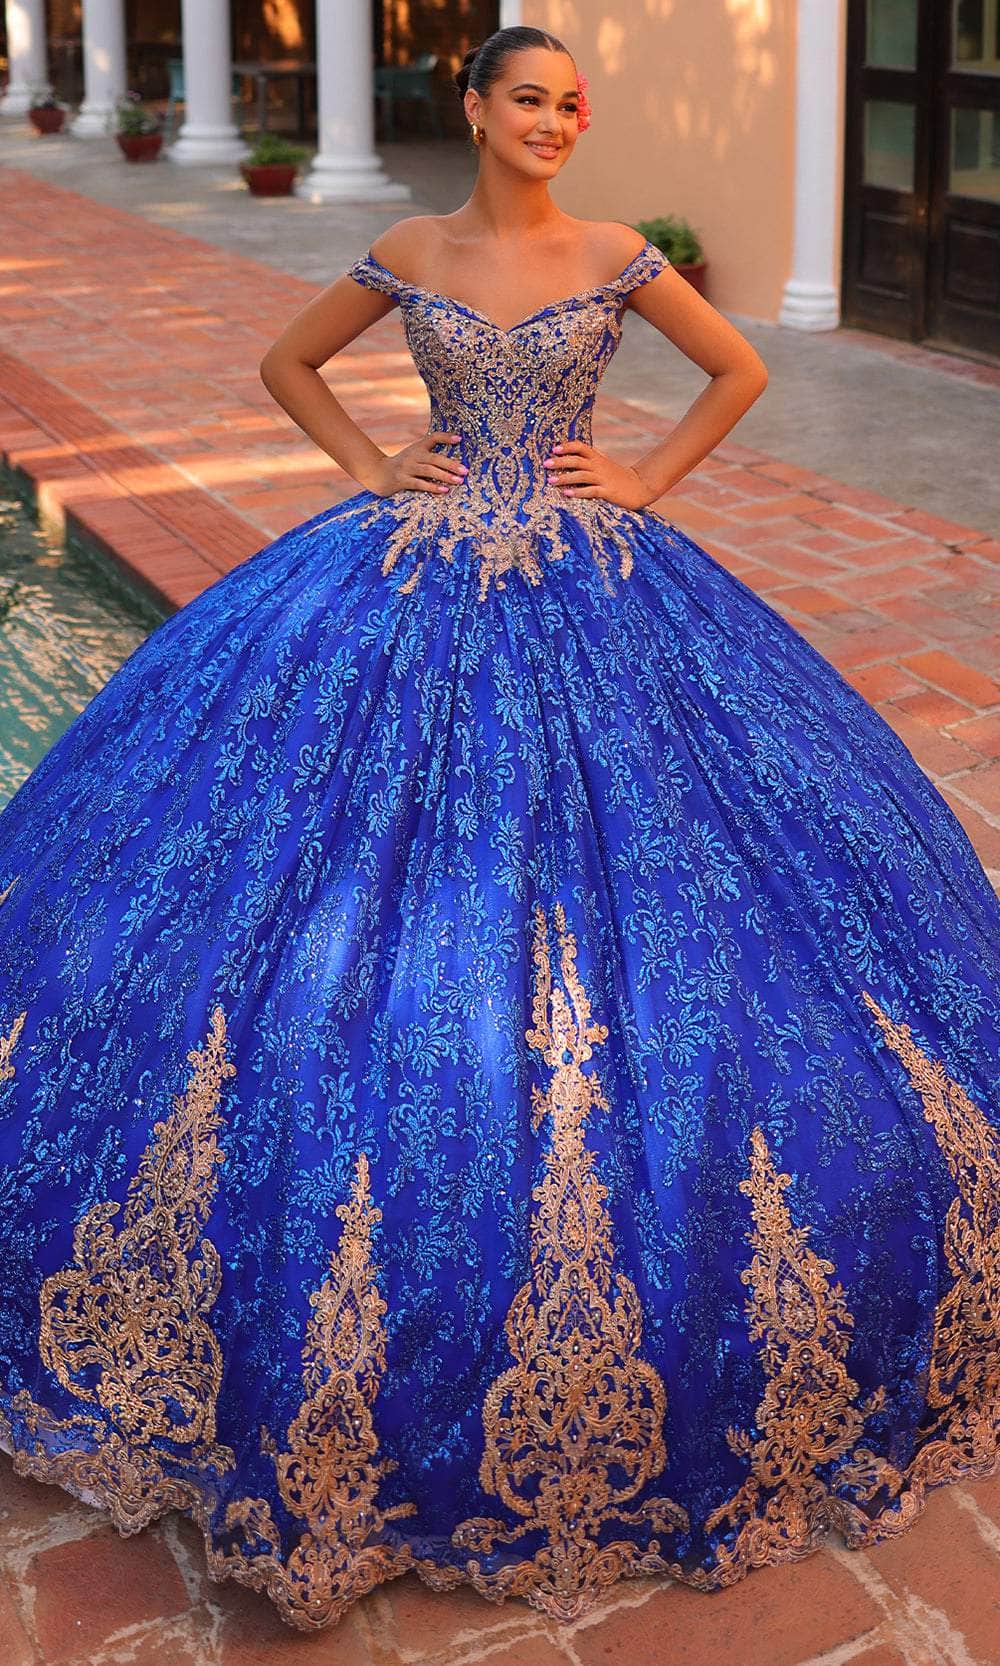 Amarra 54324 - Embroidered Ballgown 6 / Royal Blue/Gold